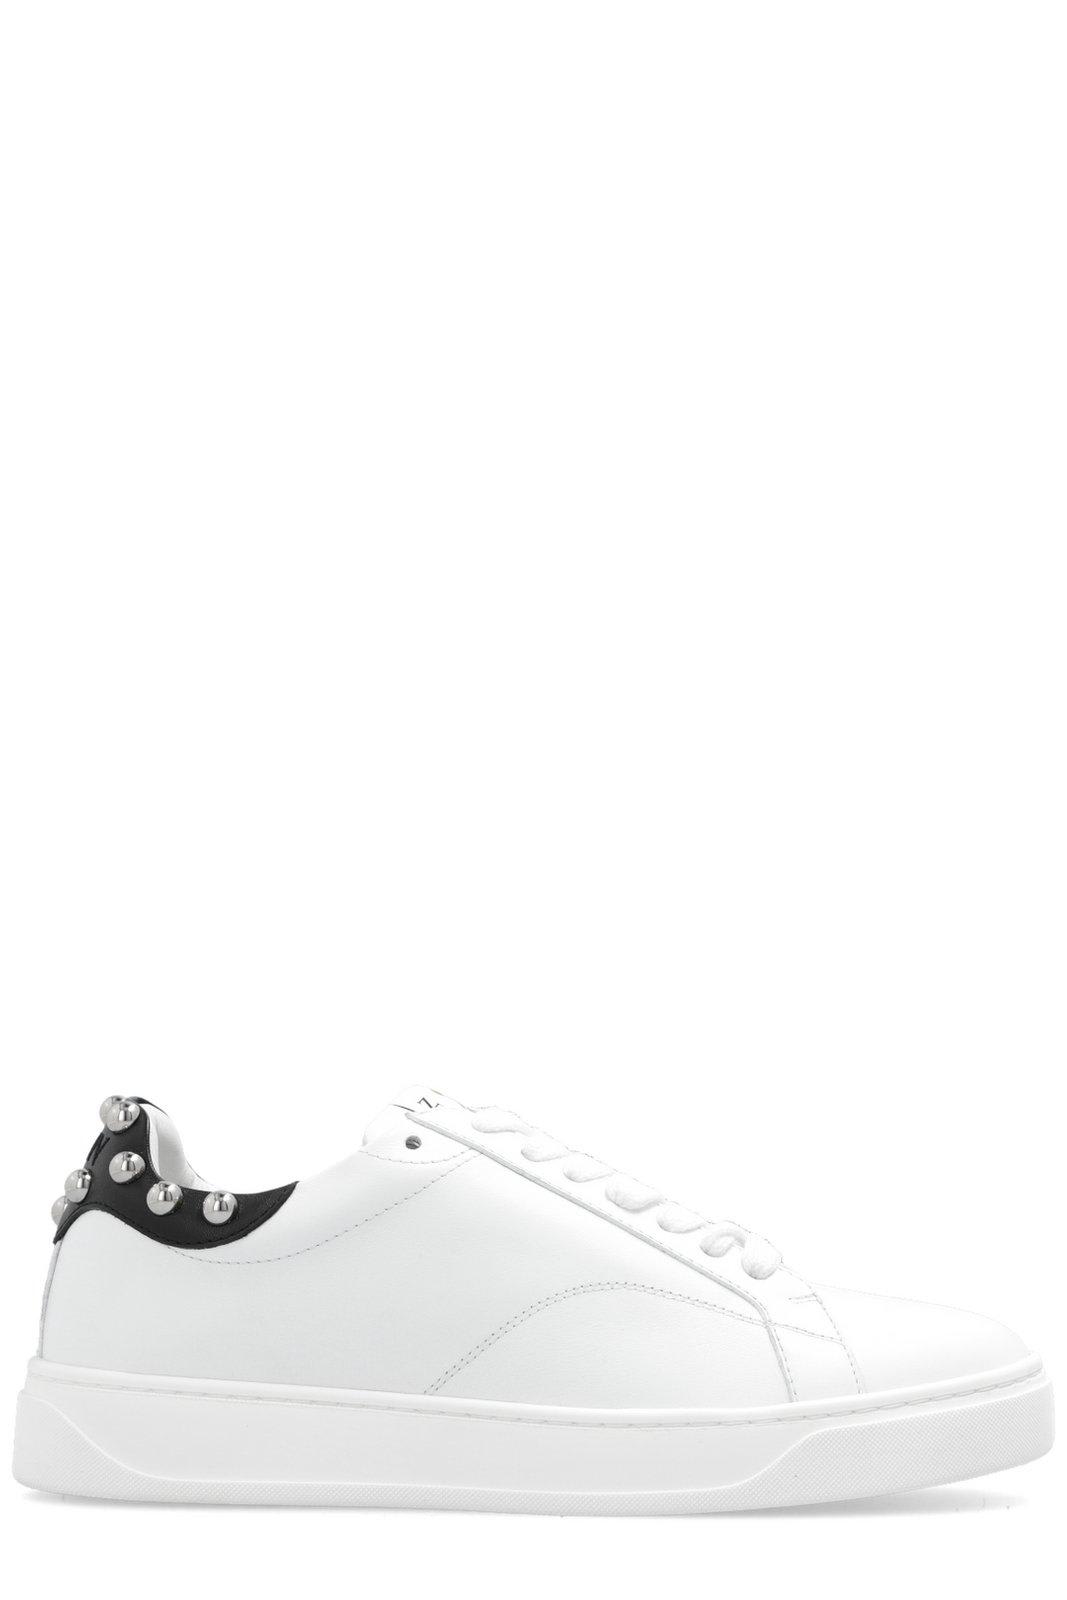 Shop Lanvin Back Studded Sneakers In White Silver